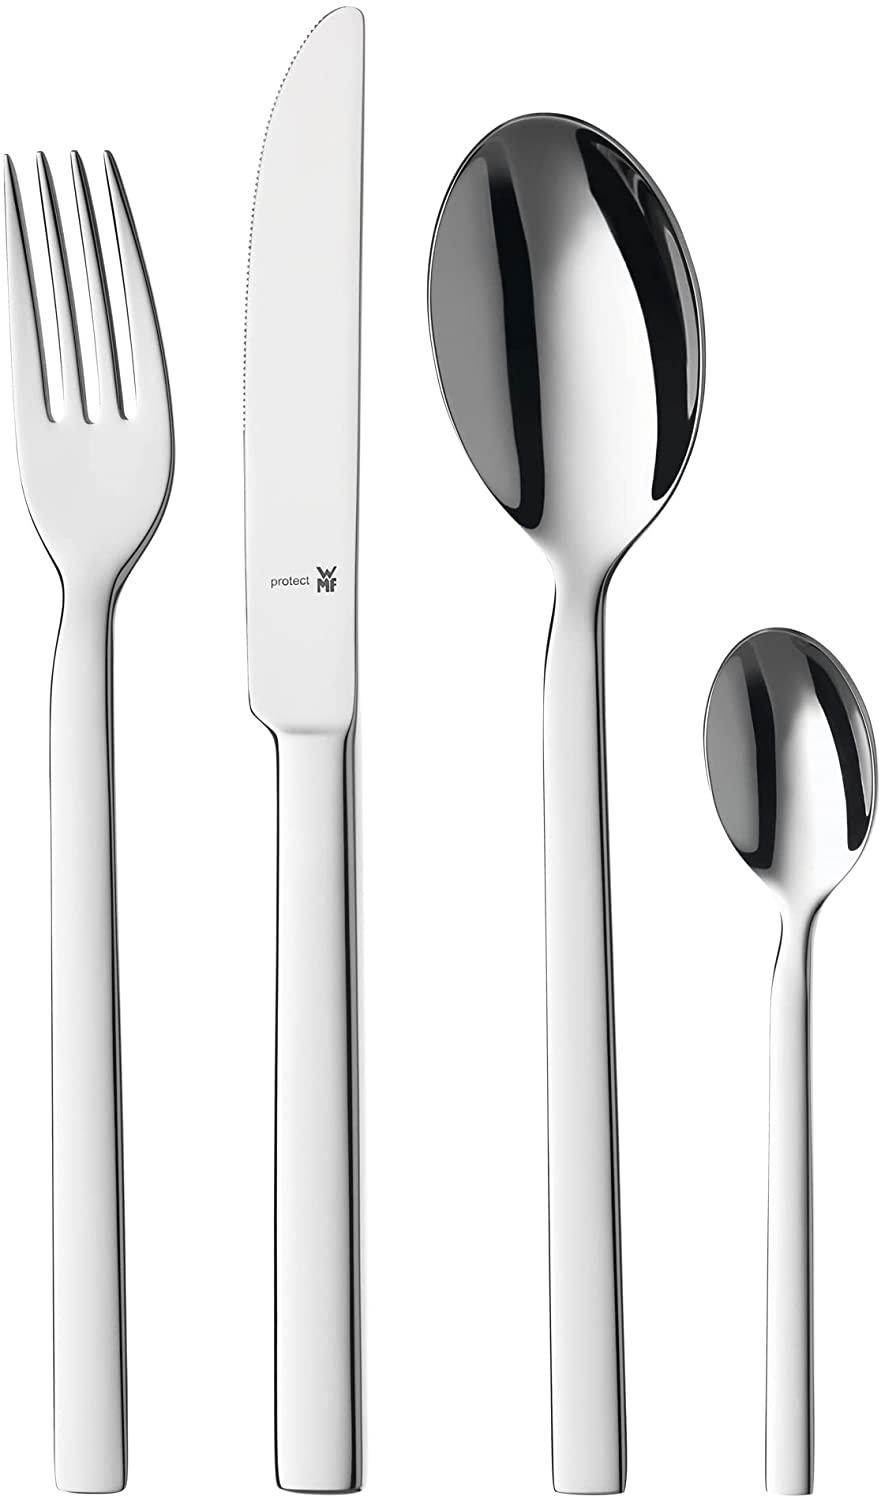 WMF Lyric Cutlery Set, Monobloc Knife, Cromargan Protect Polished Stainless Steel, Extremely Scratch-Resistant, Dishwasher Safe